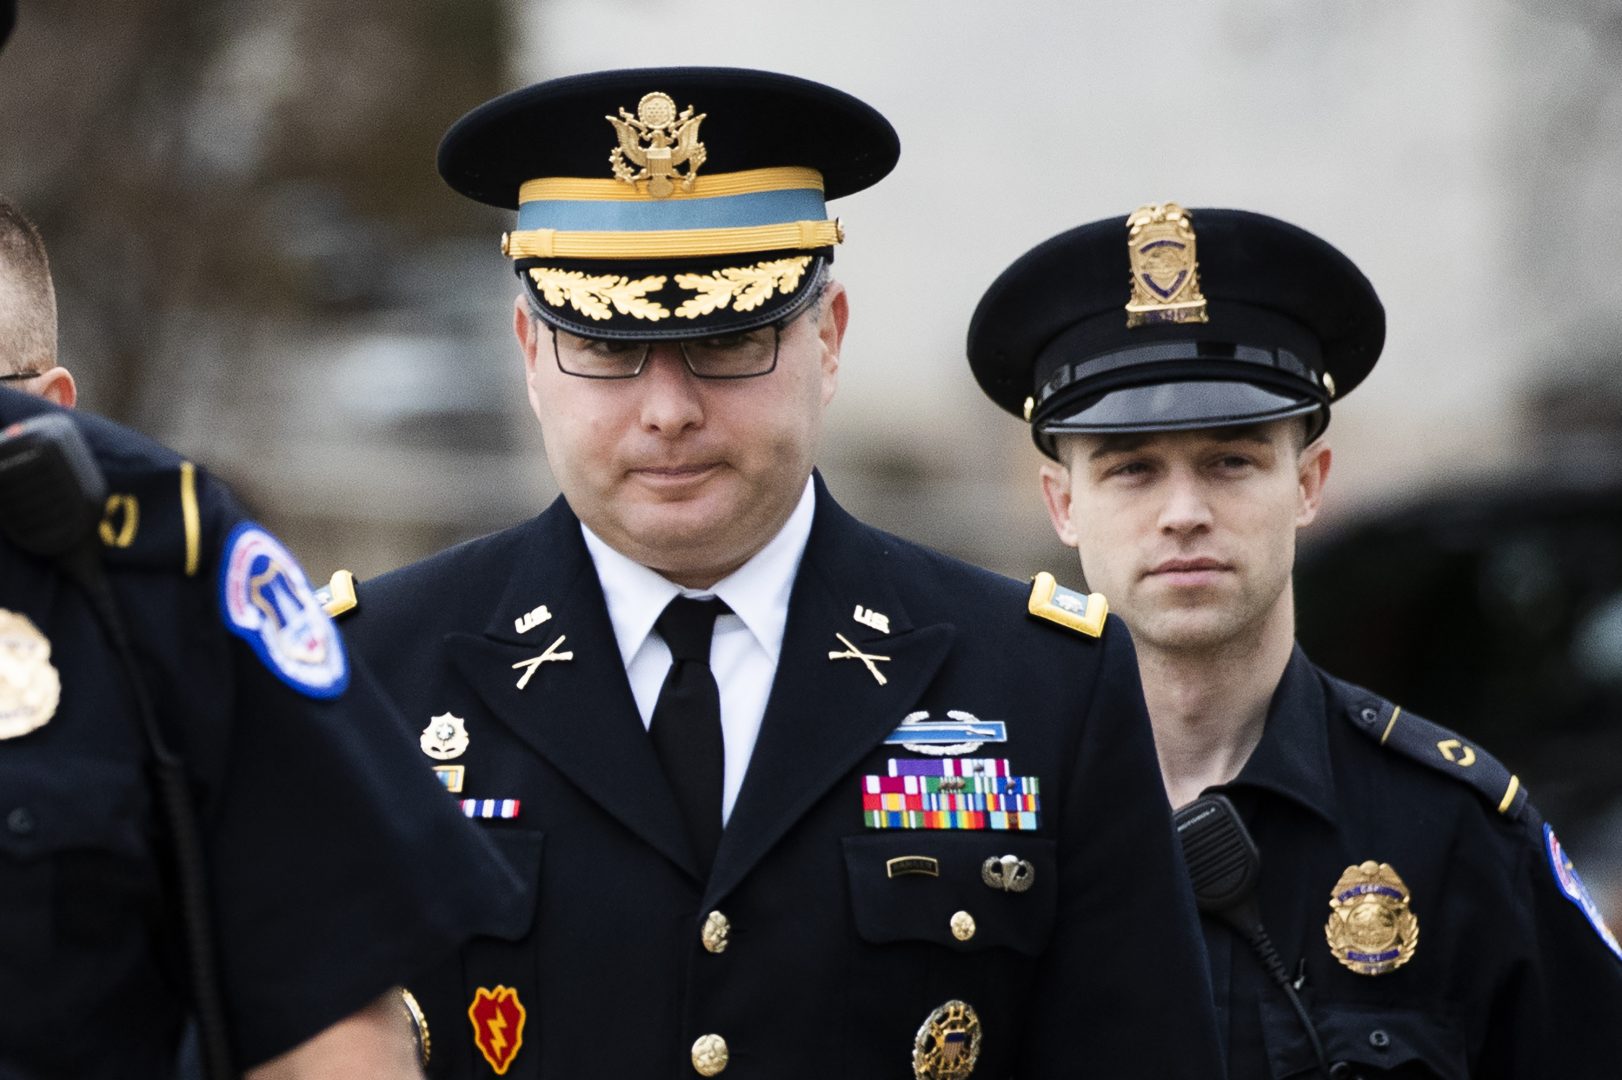 Army Lieutenant Colonel Alexander Vindman, a military officer at the National Security Council, center, arrives on Capitol Hill in Washington, Tuesday, Oct. 29, 2019, to appear before a House Committee on Foreign Affairs, Permanent Select Committee on Intelligence, and Committee on Oversight and Reform joint interview with the transcript to be part of the impeachment inquiry into President Donald Trump.